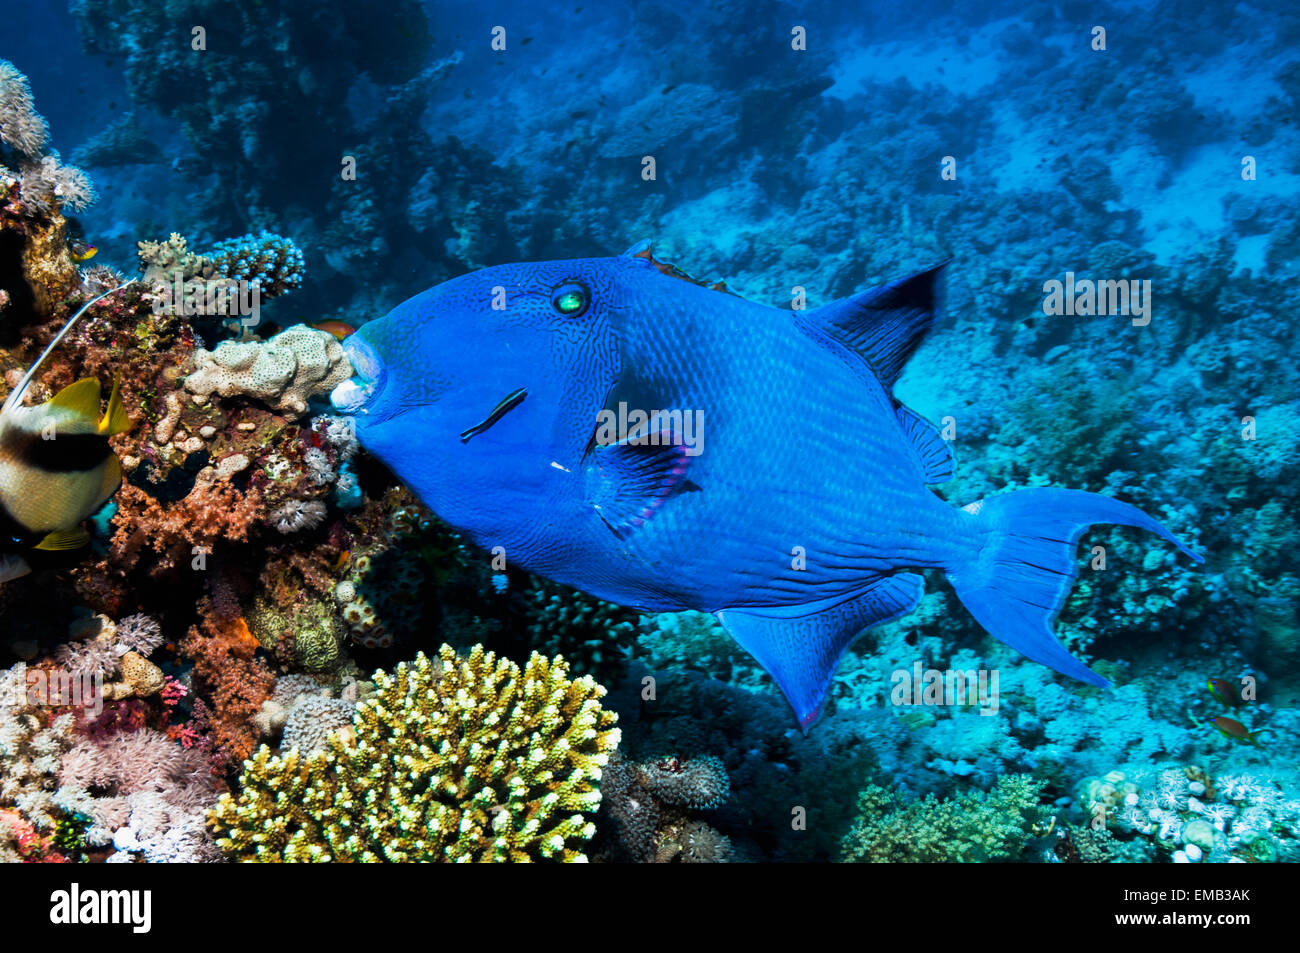 Blue triggerfish (Pseudobalistes fuscus) with a Bluestreak cleaner wrasse (Labroides dimdiatus).  Egypt, Red Sea. Stock Photo